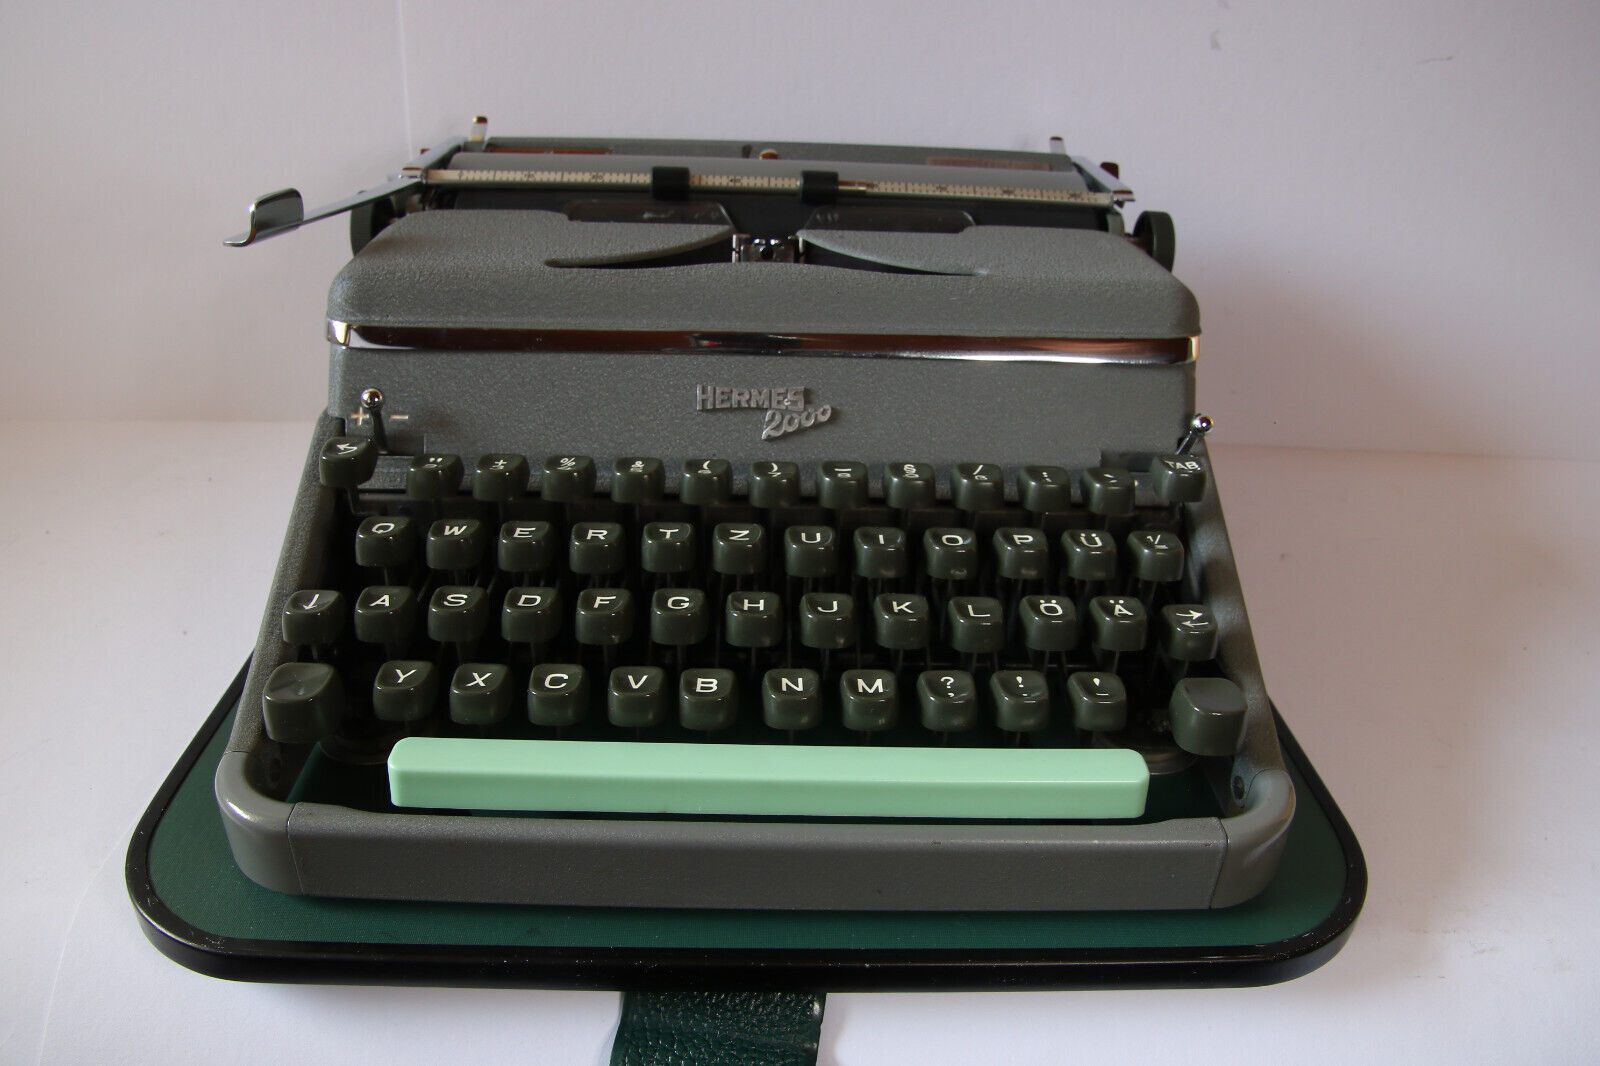 Vintage  Hermes 2000 Swiss Paillard Typewriter from 1956 serviced-tested-cleaned